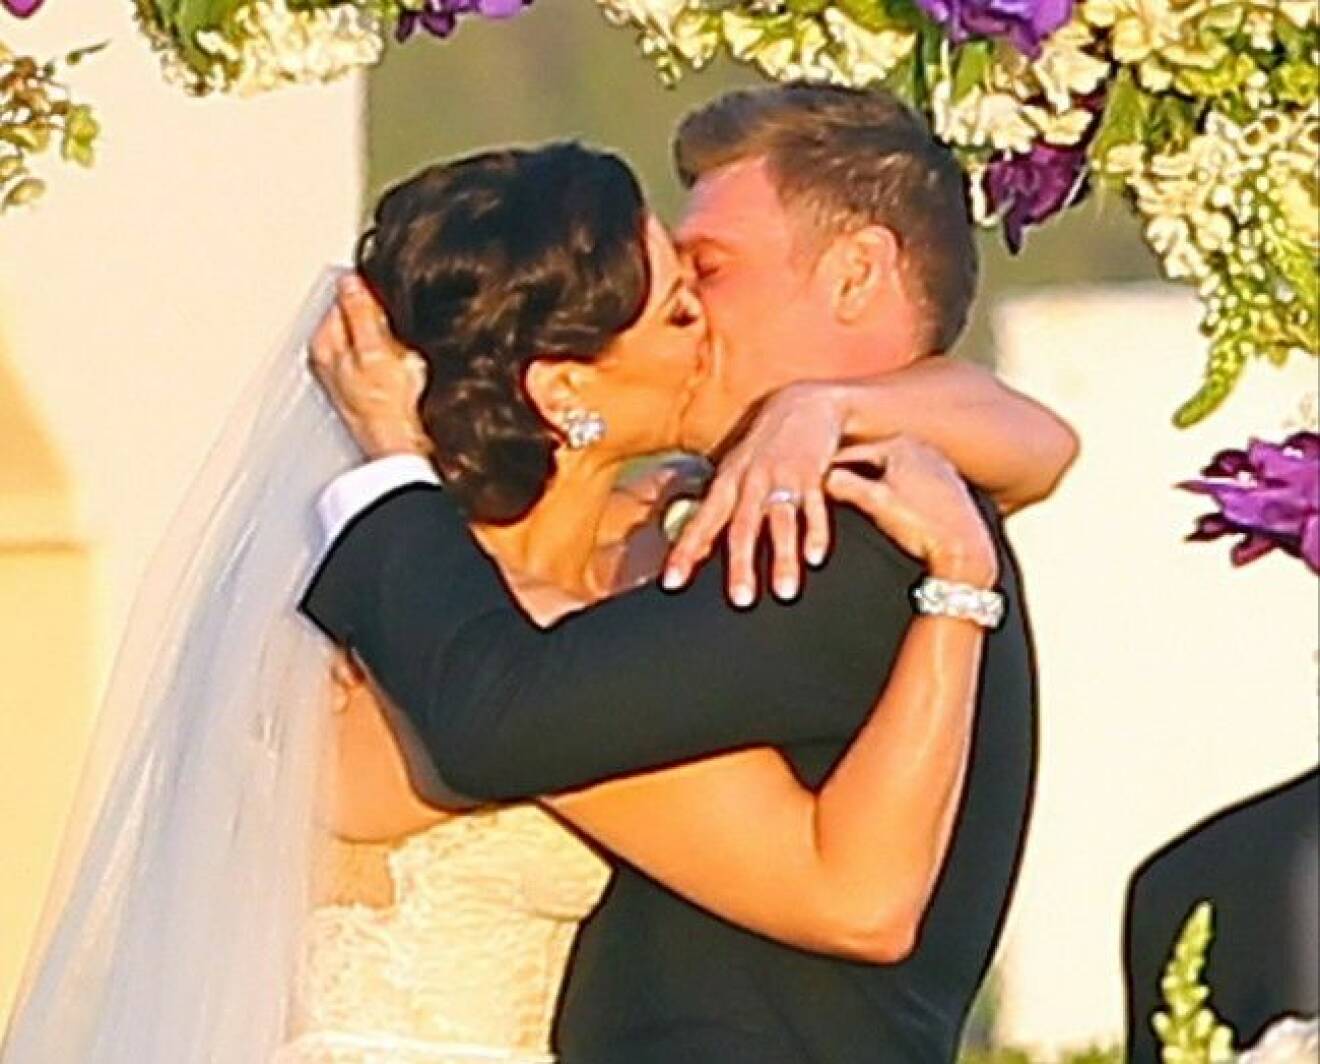 ***INTERNET OUT*** 51381879 The Backstreet Boys member Nick Carter weds Lauren Kitt at an intimate ceremony at the Bacara Resort & Spa in Santa Barbara, California on April 12, 2014. The couple exchanged their own written vows. Nicks bandmate Howie Dorough was also in attendance. COPYRIGHT STELLA PICTURES